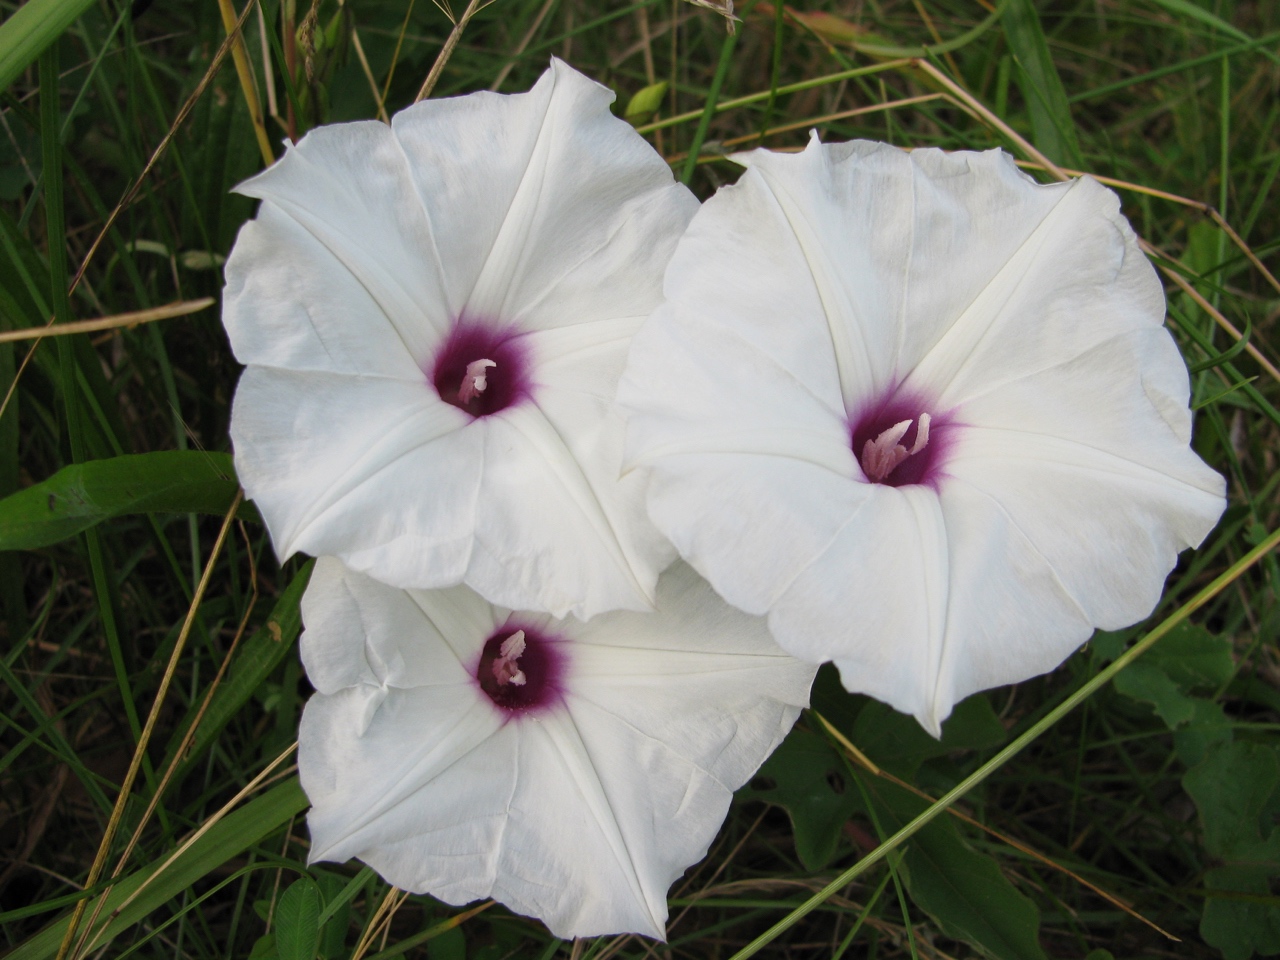 The Scientific Name is Ipomoea pandurata. You will likely hear them called Wild Potato-vine, Wild Sweet Potato, Manroot, Man-of-the-earth. This picture shows the Close-up of flowers of Ipomoea pandurata